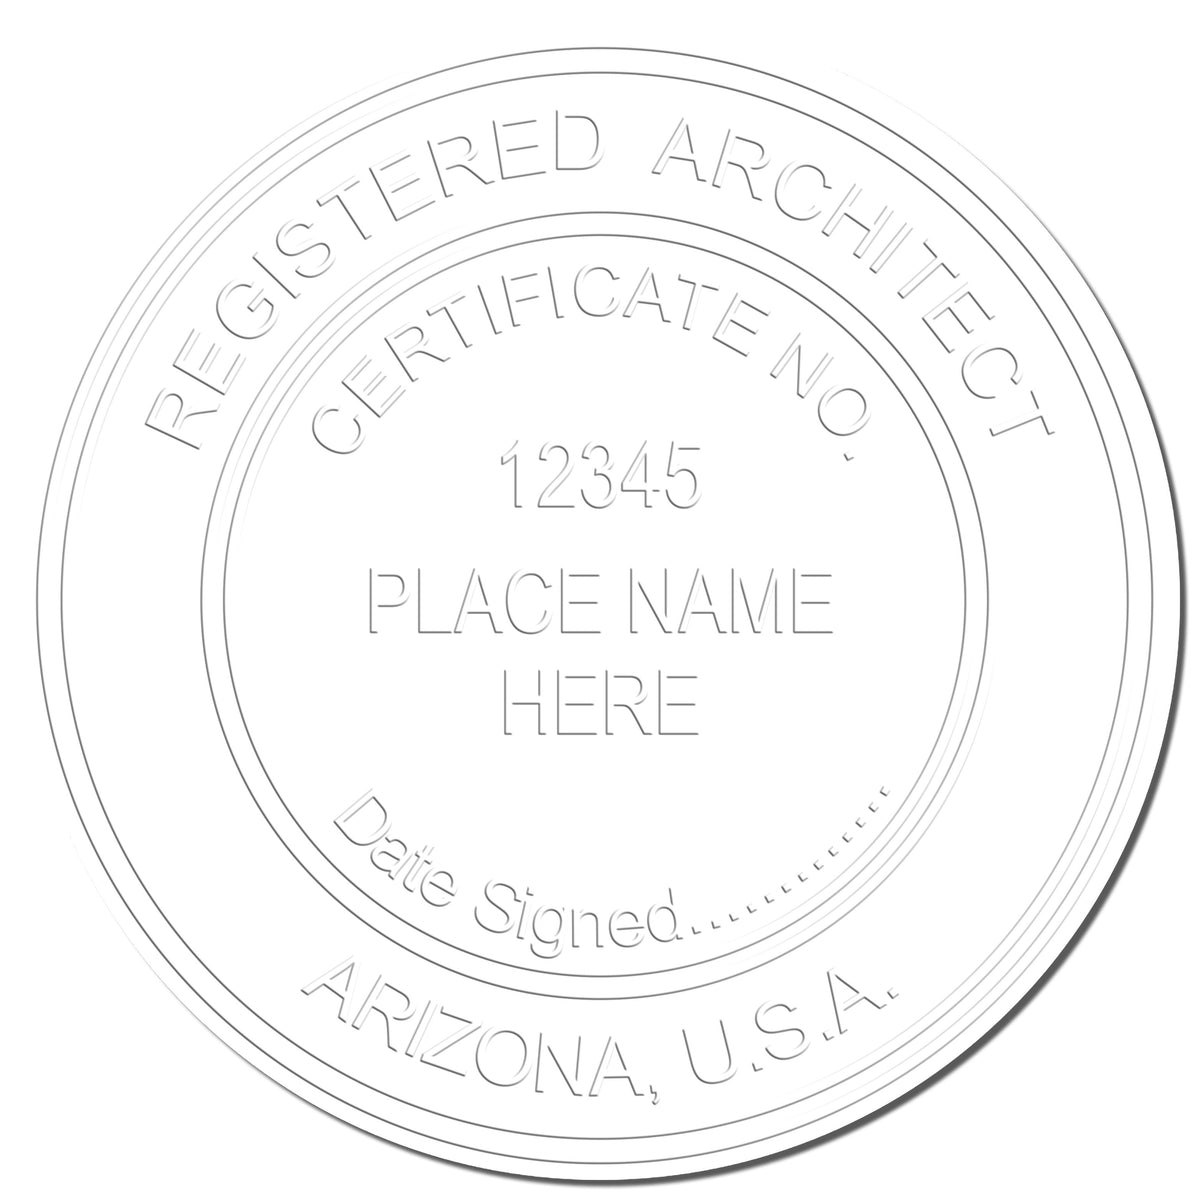 A photograph of the Arizona Desk Architect Embossing Seal stamp impression reveals a vivid, professional image of the on paper.